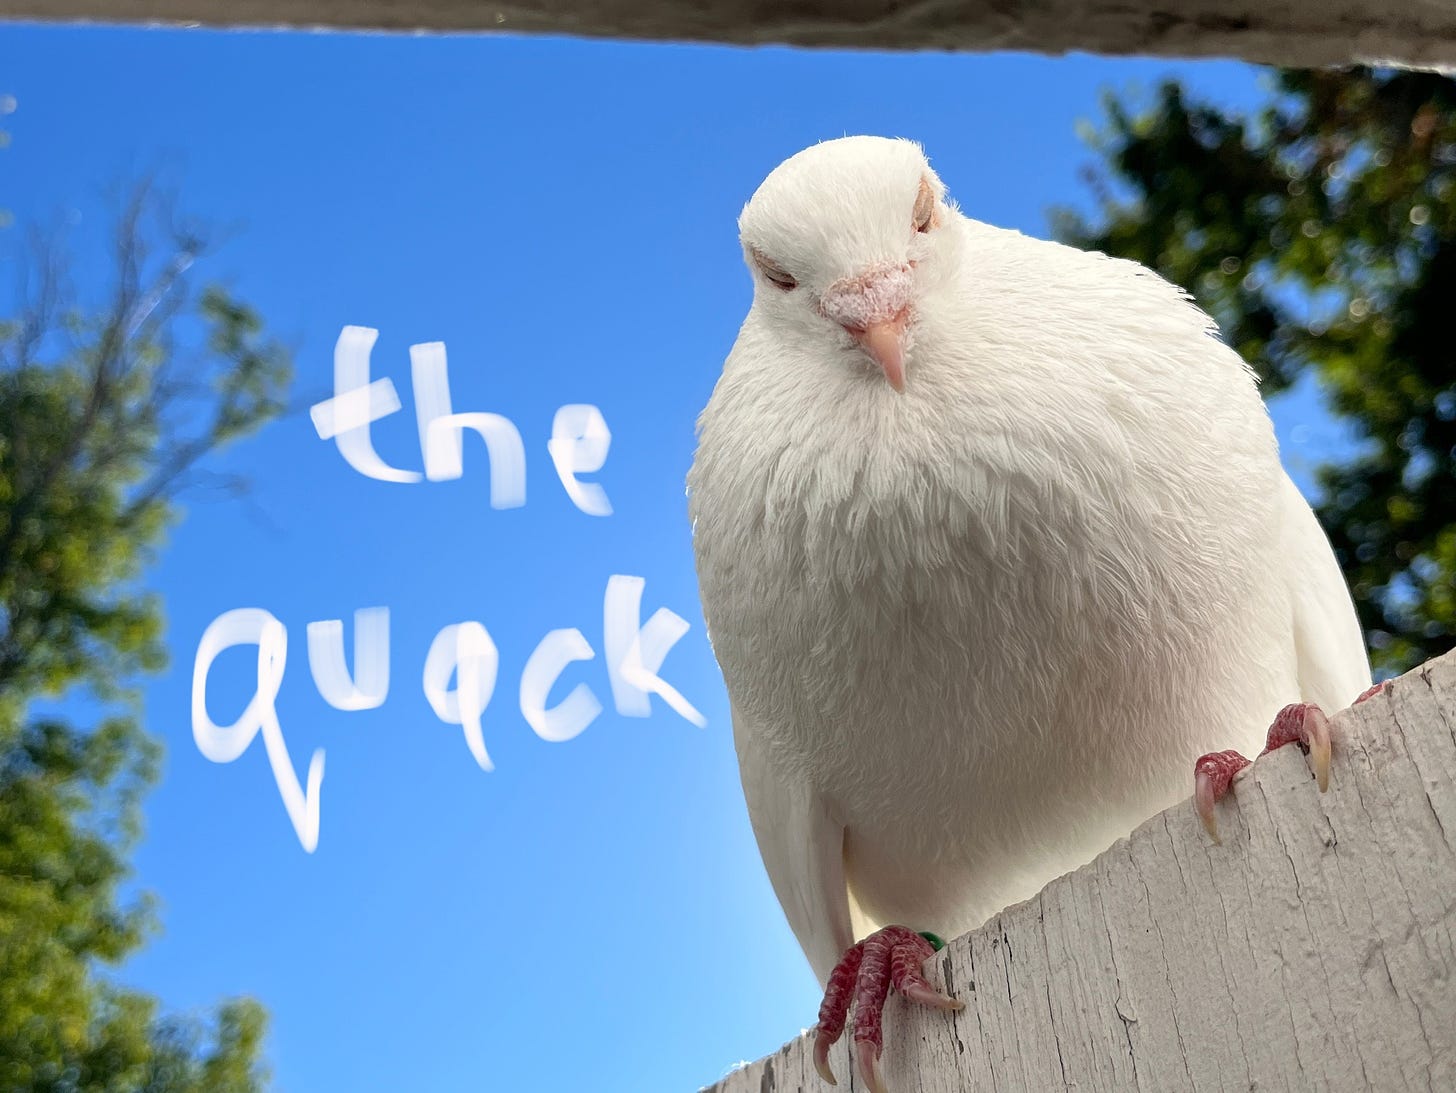 A white pigeon gazes down from the dop of a door. he is set against a blue sky with the words "the quack" written in white whispy letters